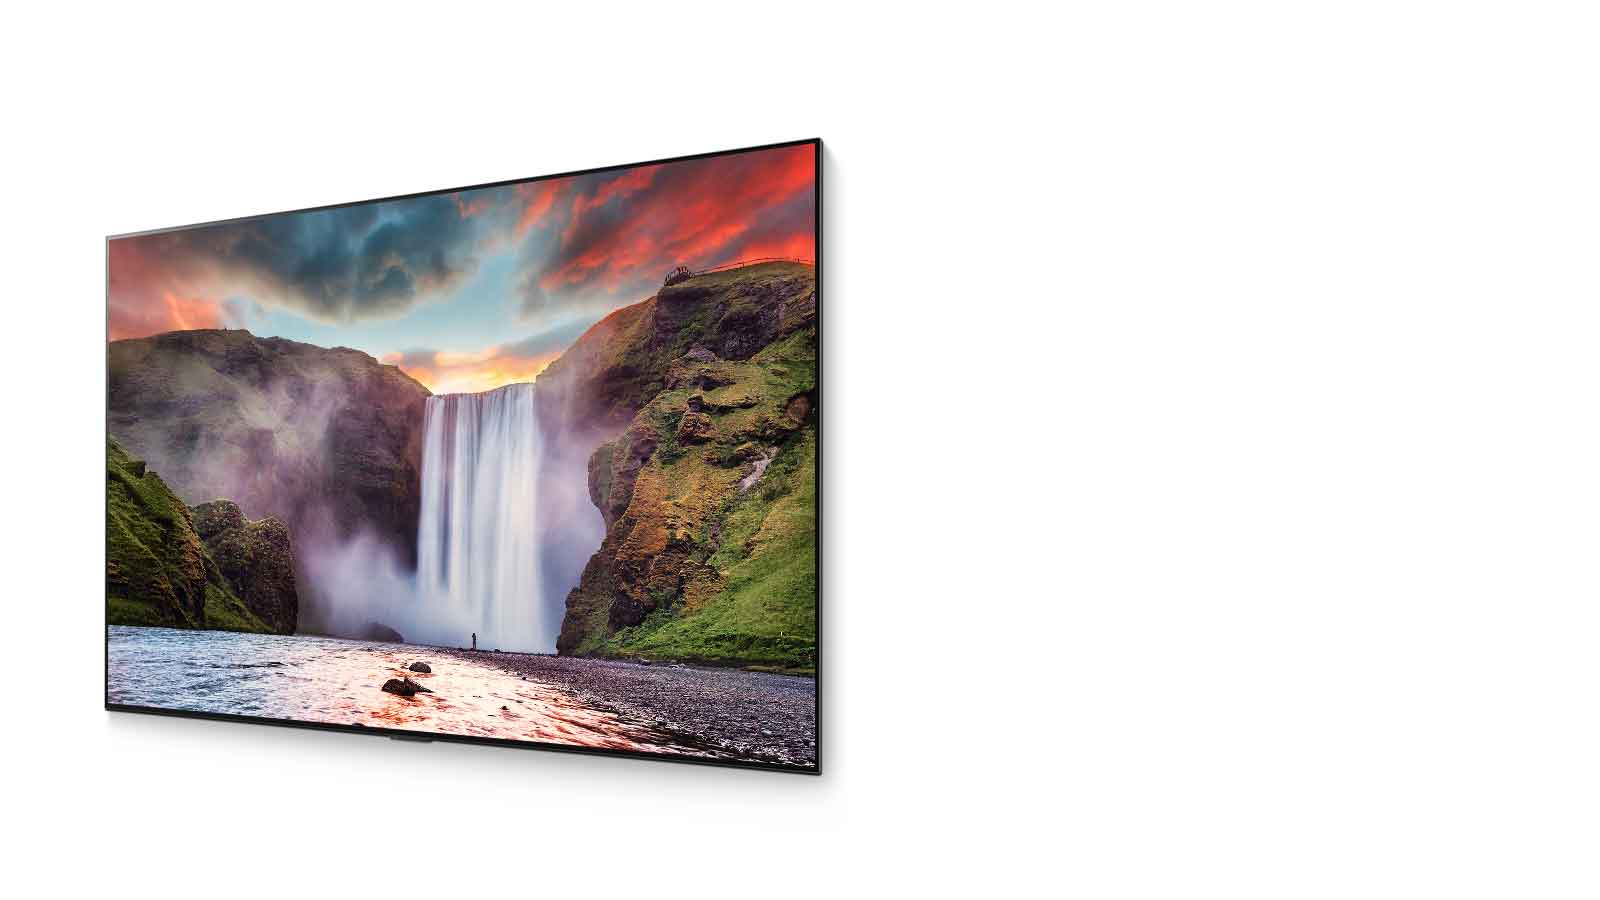 A spectacular waterfall with beautiful scenery displayed on an OLED TV(play the video)